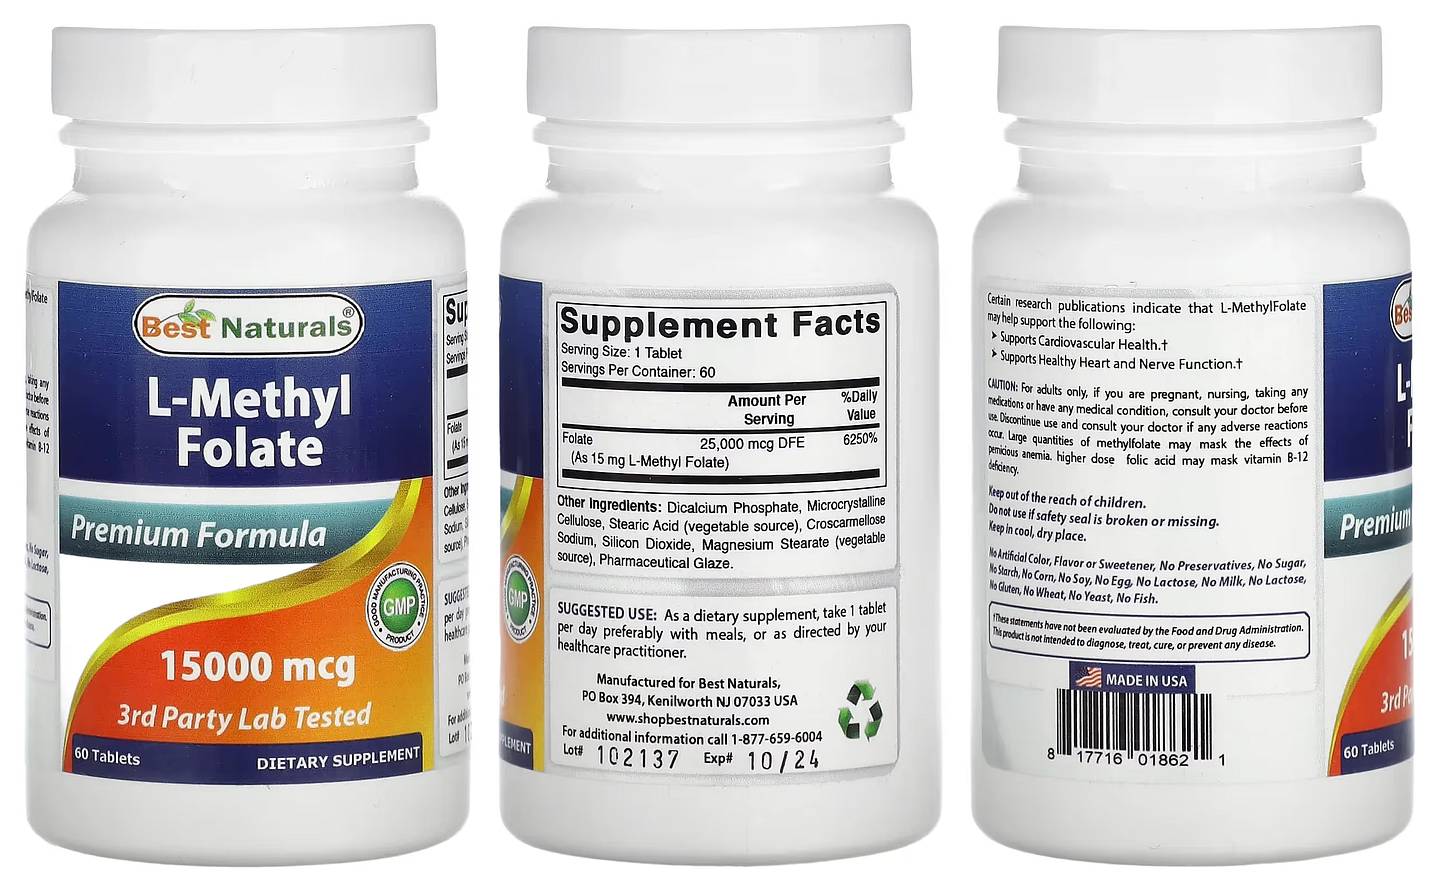 Best Naturals, L-Methyl Folate packaging